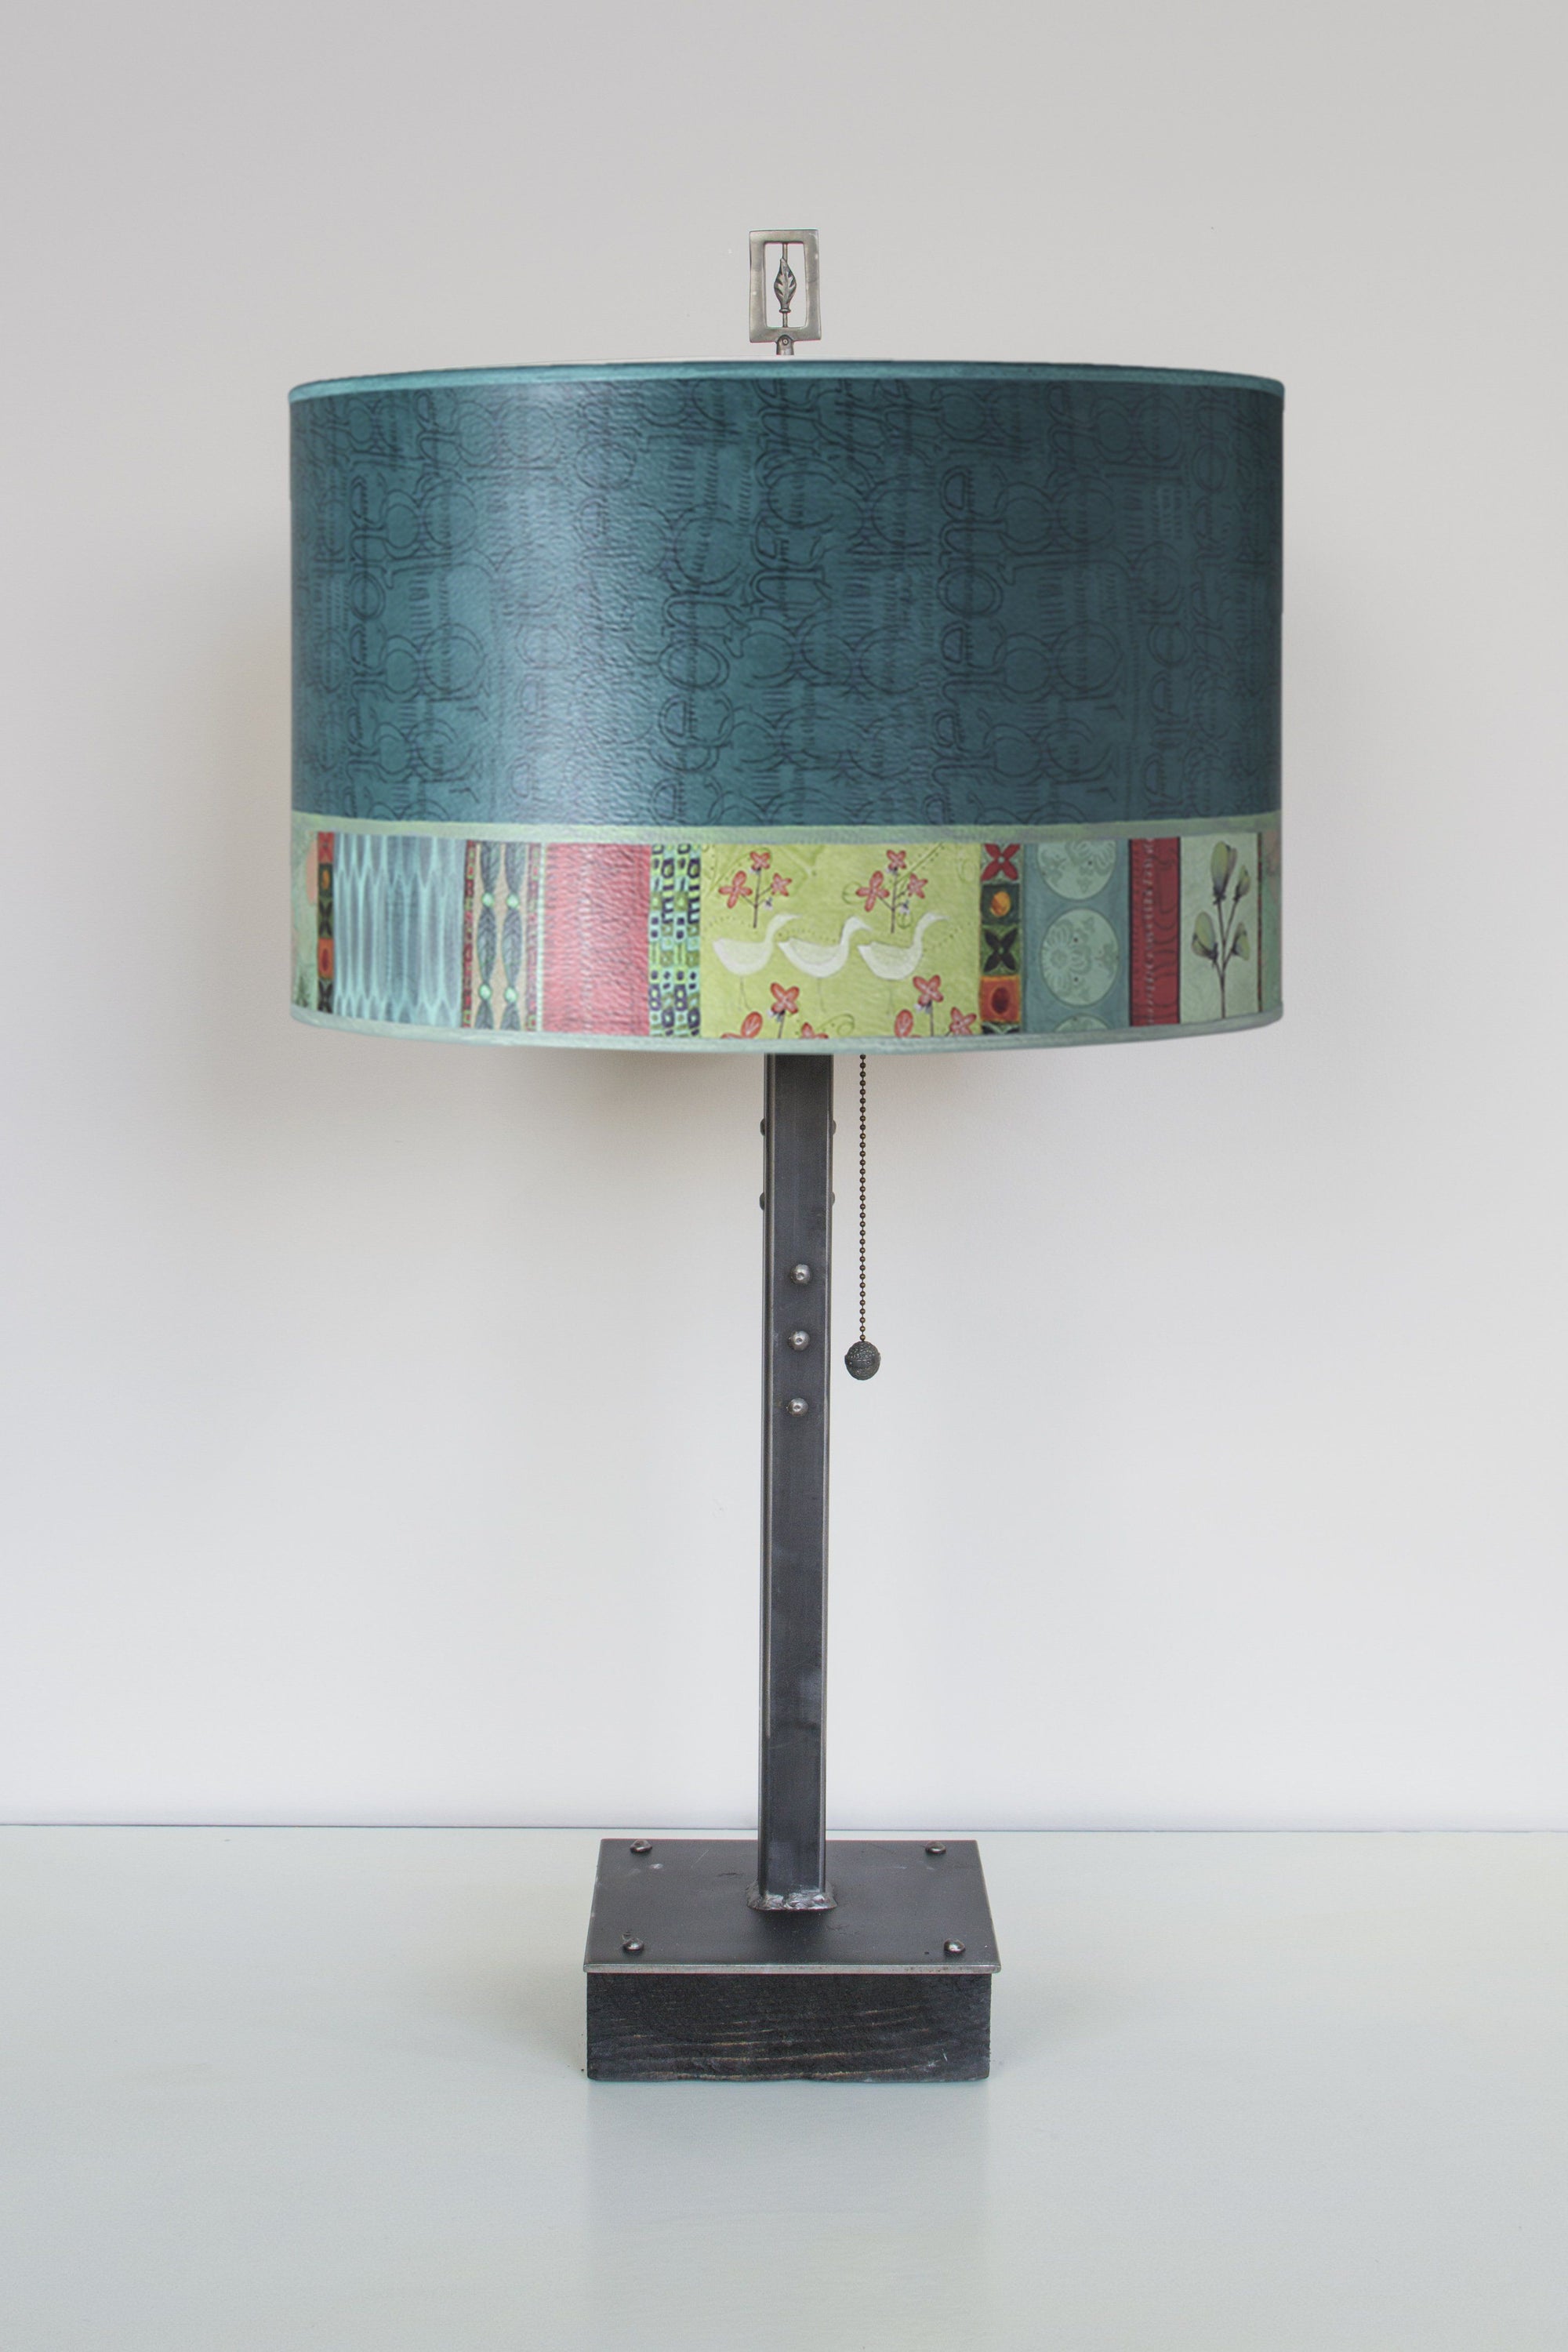 Janna Ugone & Co Table Lamps Steel Table Lamp on Wood with Large Drum Shade in Melody in Jade